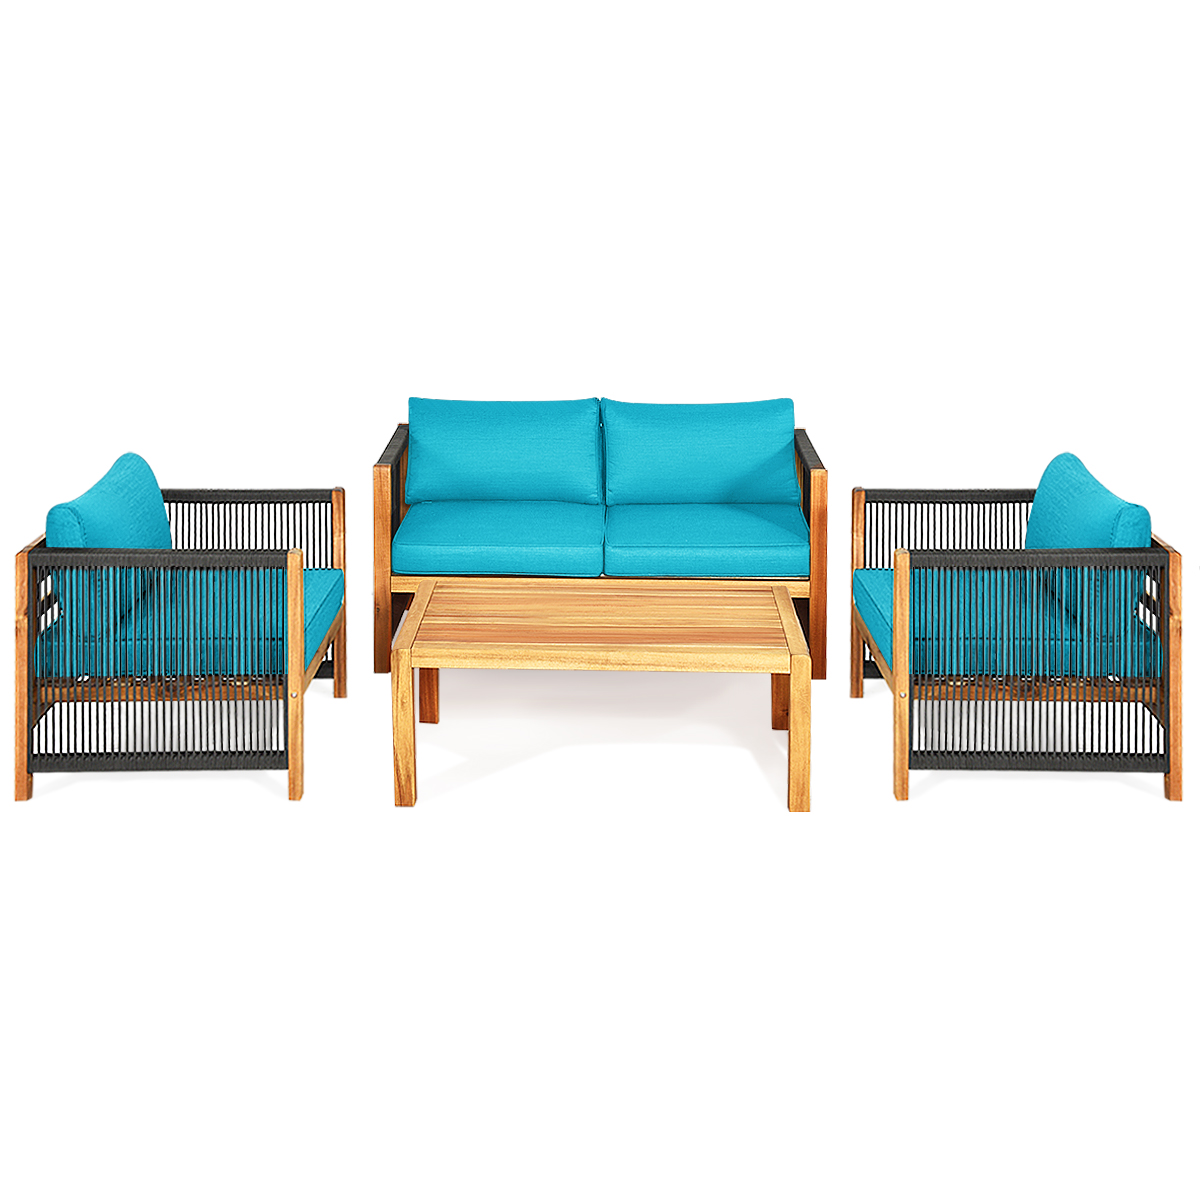 Patiojoy 4-Piece Outdoor Patio Wood Conversation Furniture Set Padded Chair with Coffee Table Turquoise - image 1 of 5